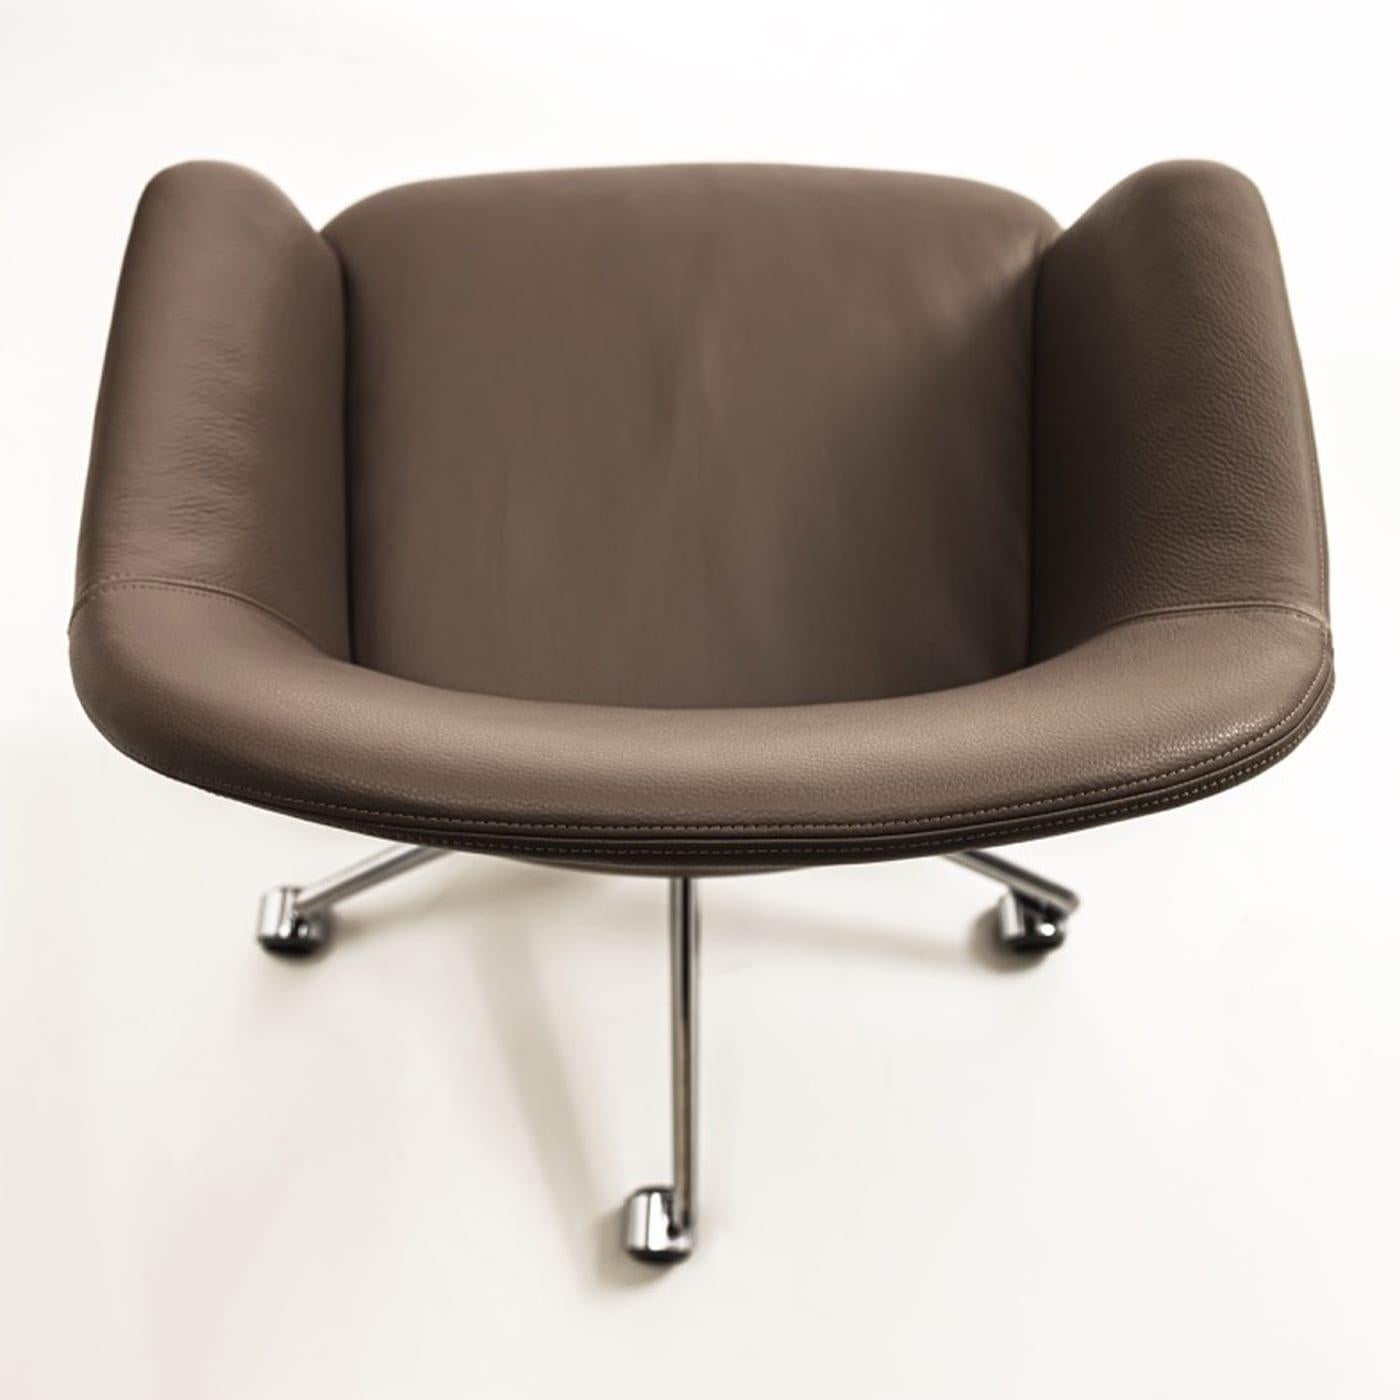 Eva swivel padded chair has a rigid polyurethane shell padded and covered in soft brown leather and a five star base painted in chrome. There is the possibility of height adjustment. Please, contact us for customization options.
  